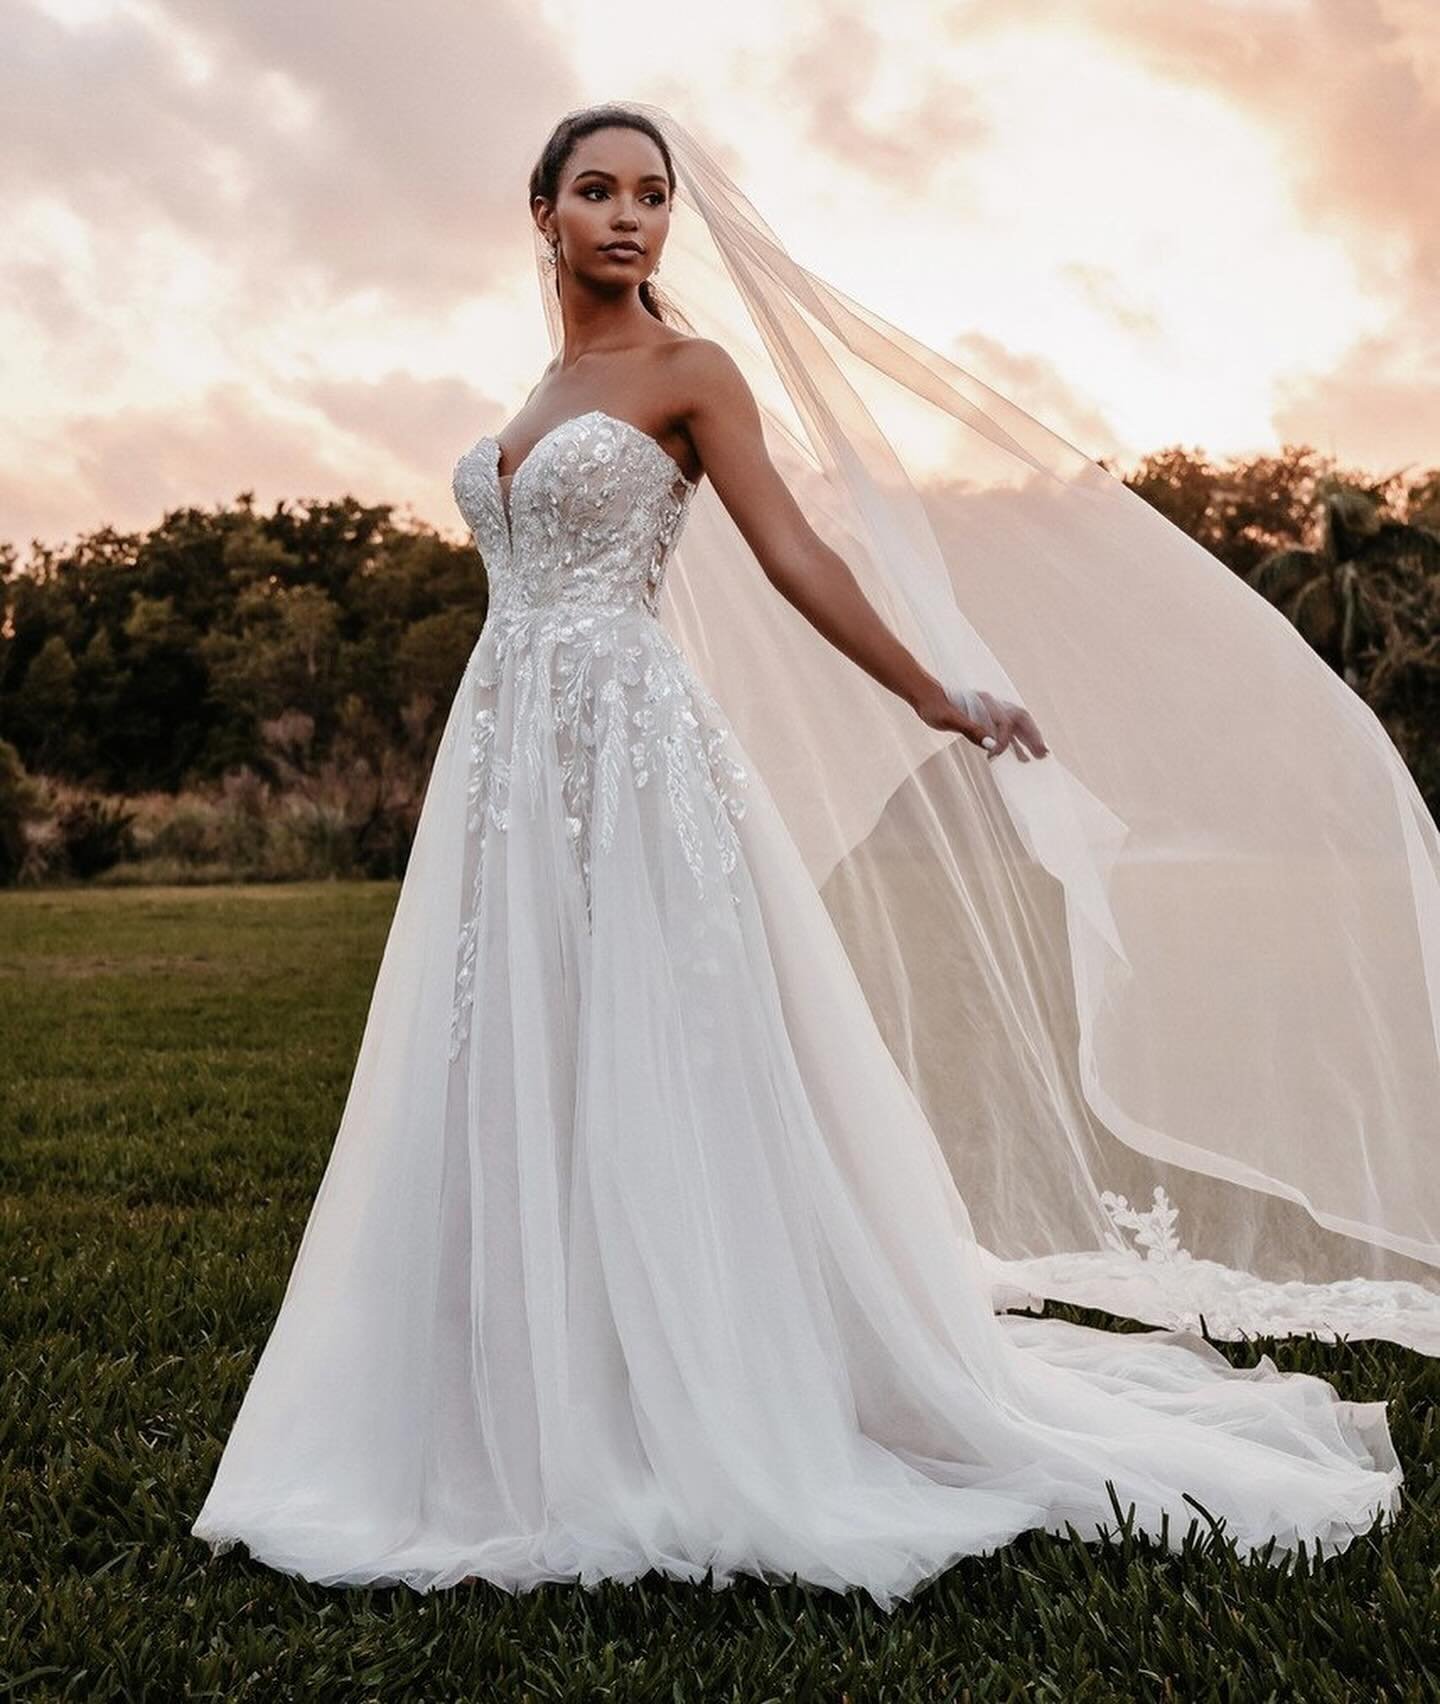 ✨ Meet 9852!! ✨

I am genuinely obsessed with this dress and her beautiful sparkle detailing!! Textured leaves and vines climb the bodice and sheer back of this strapless, aline style. She has a plunge sweetheart neckline and stunning illusion back!
